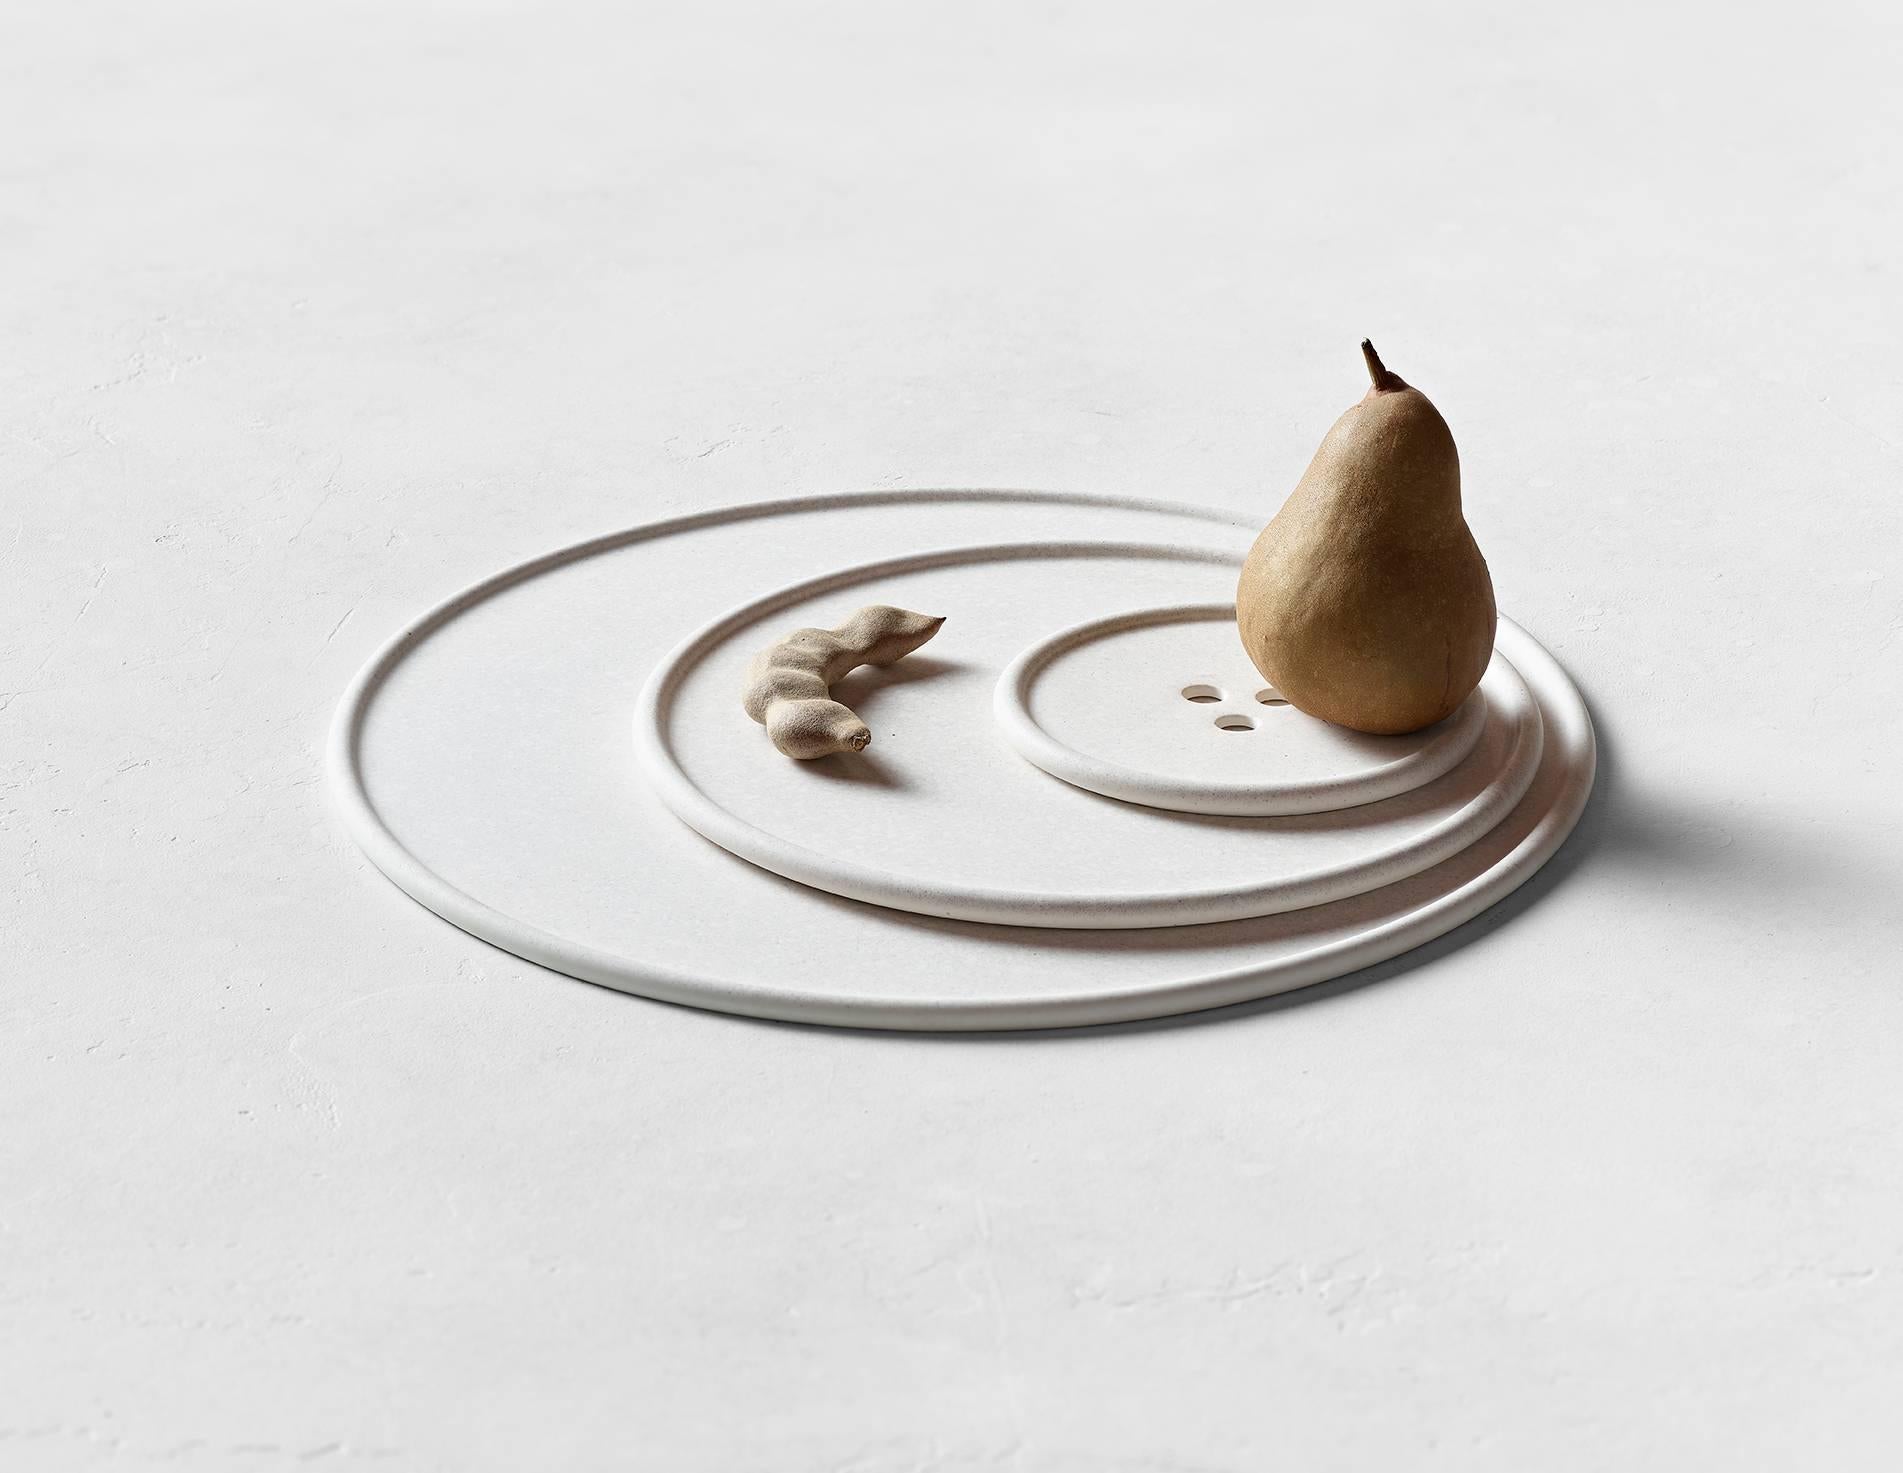 Cast in one pour, this dish is formed like a button to showcase your everyday favorites. Hand-mixed with different minerals and natural pigments, the Bouton carries subtle textures on its surface. As the concrete settles uniquely for each pour, no